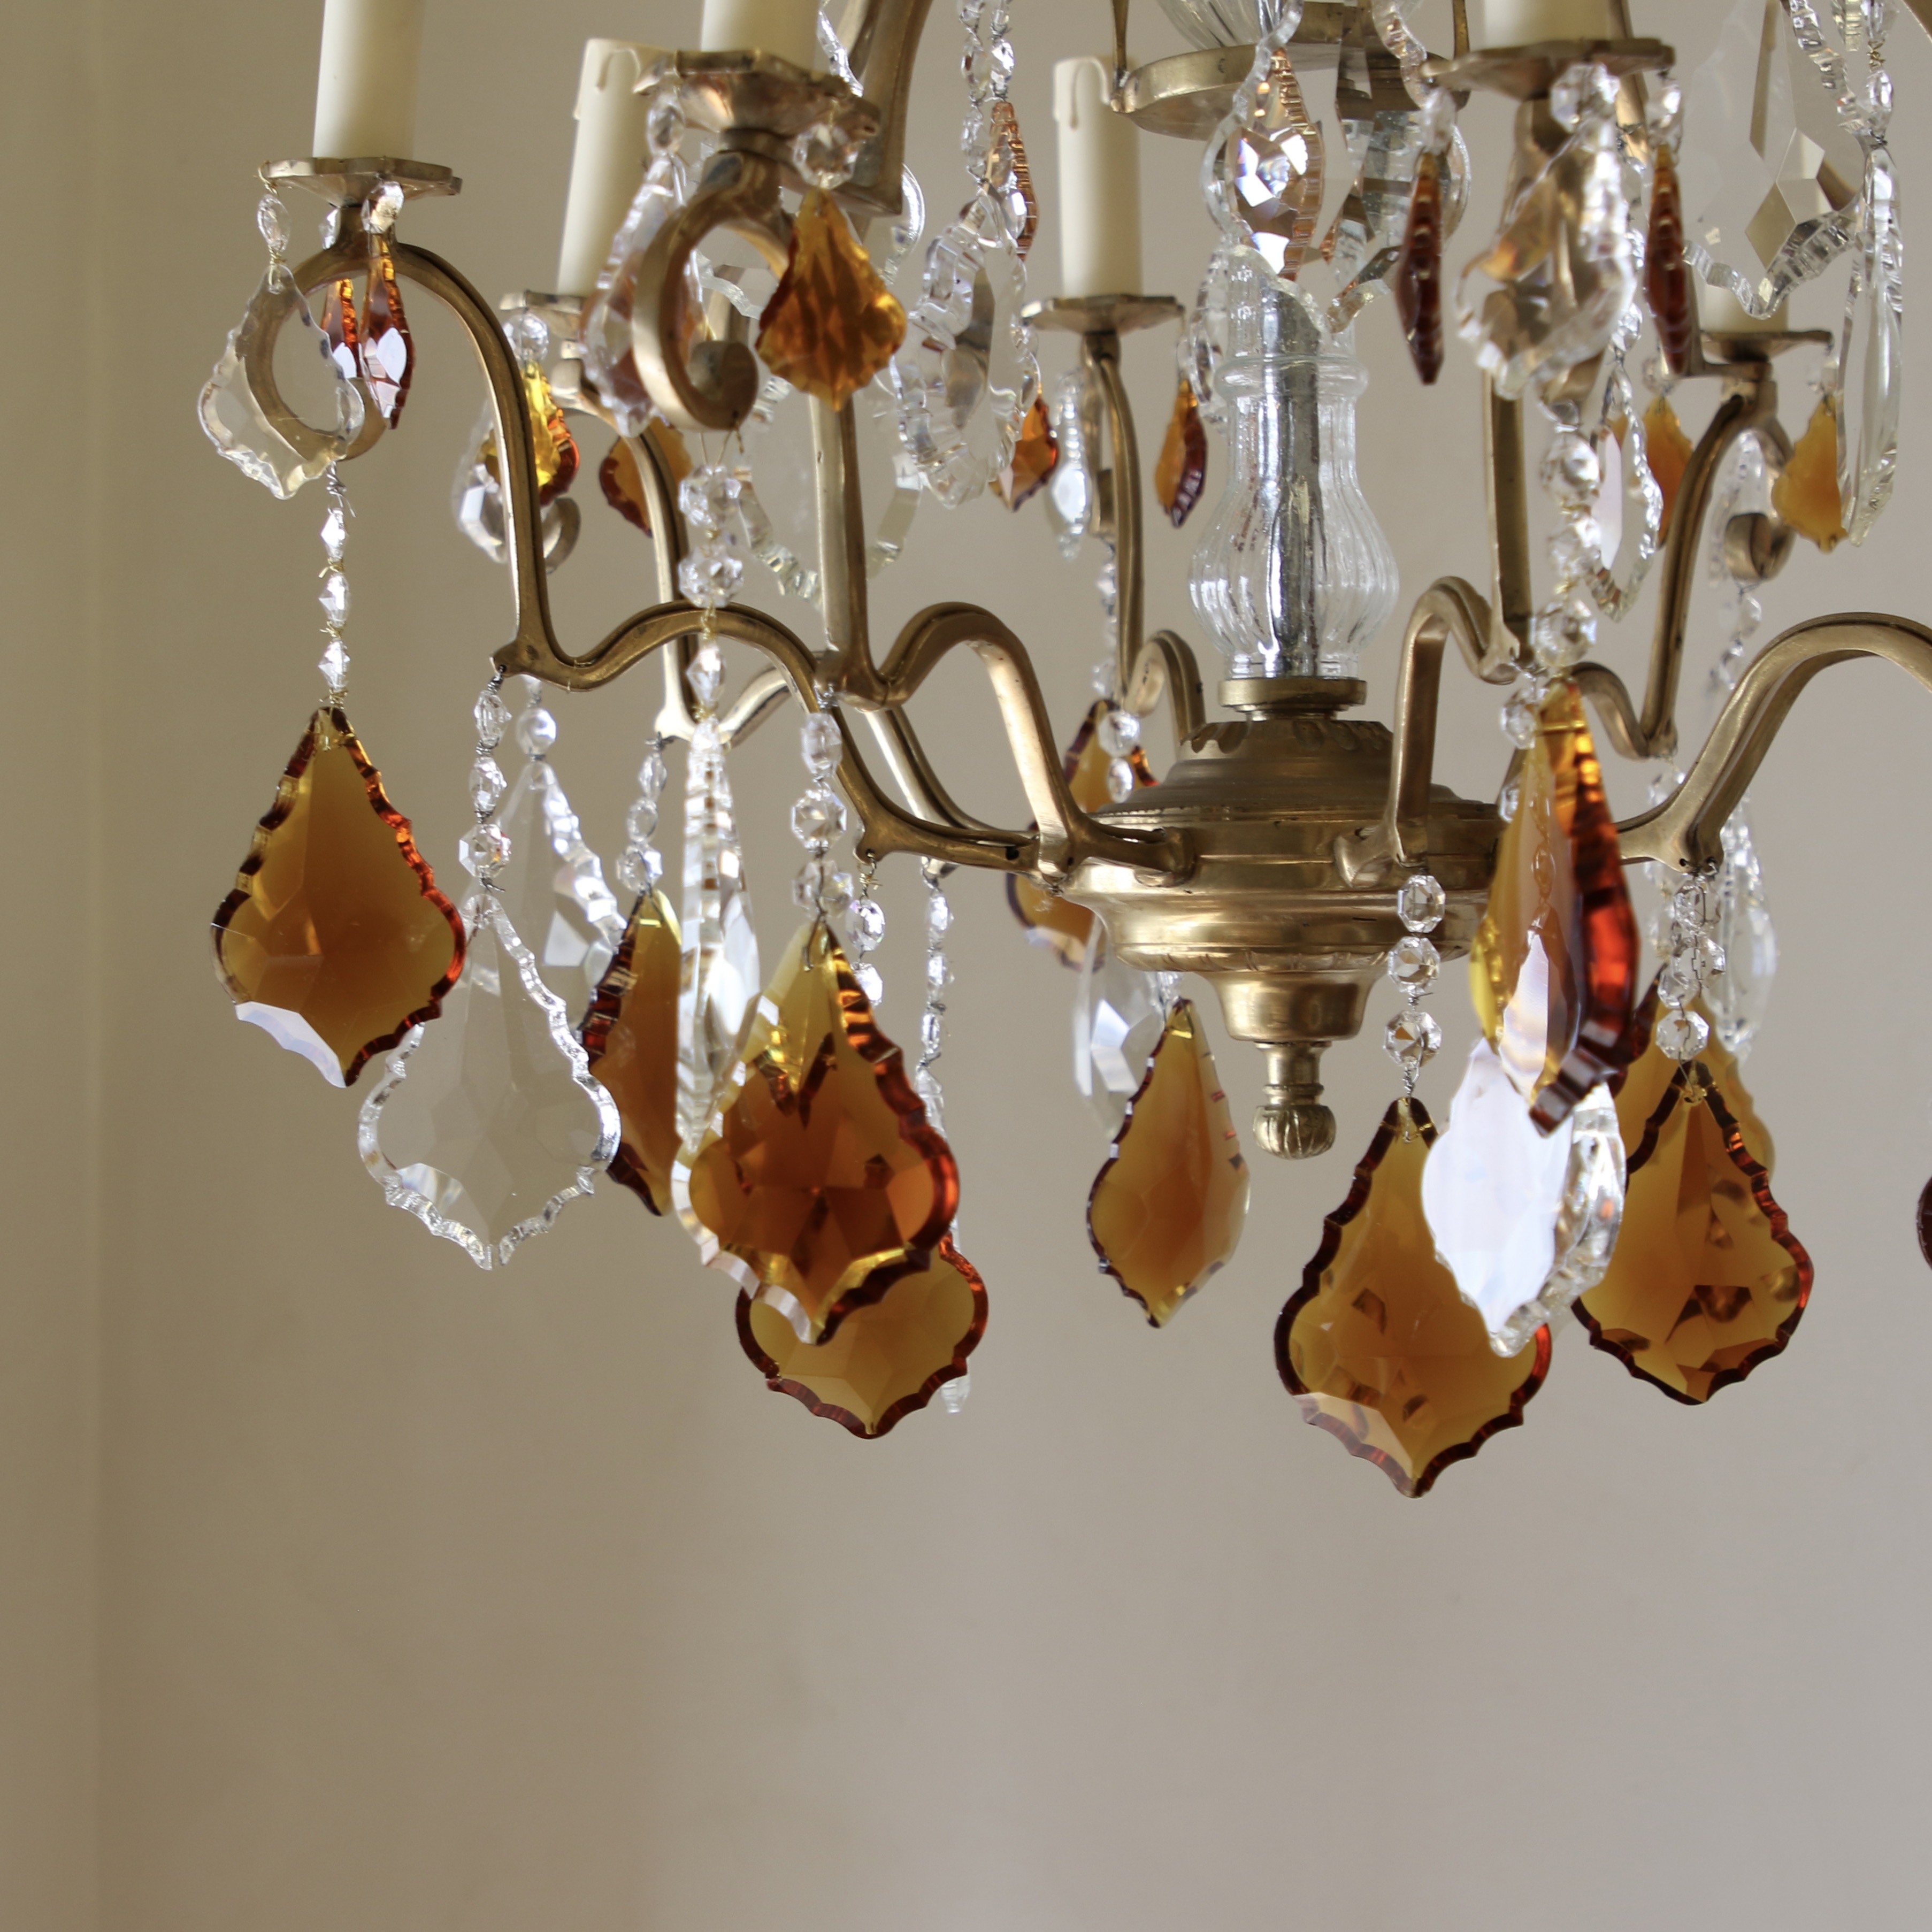 A French Chandelier